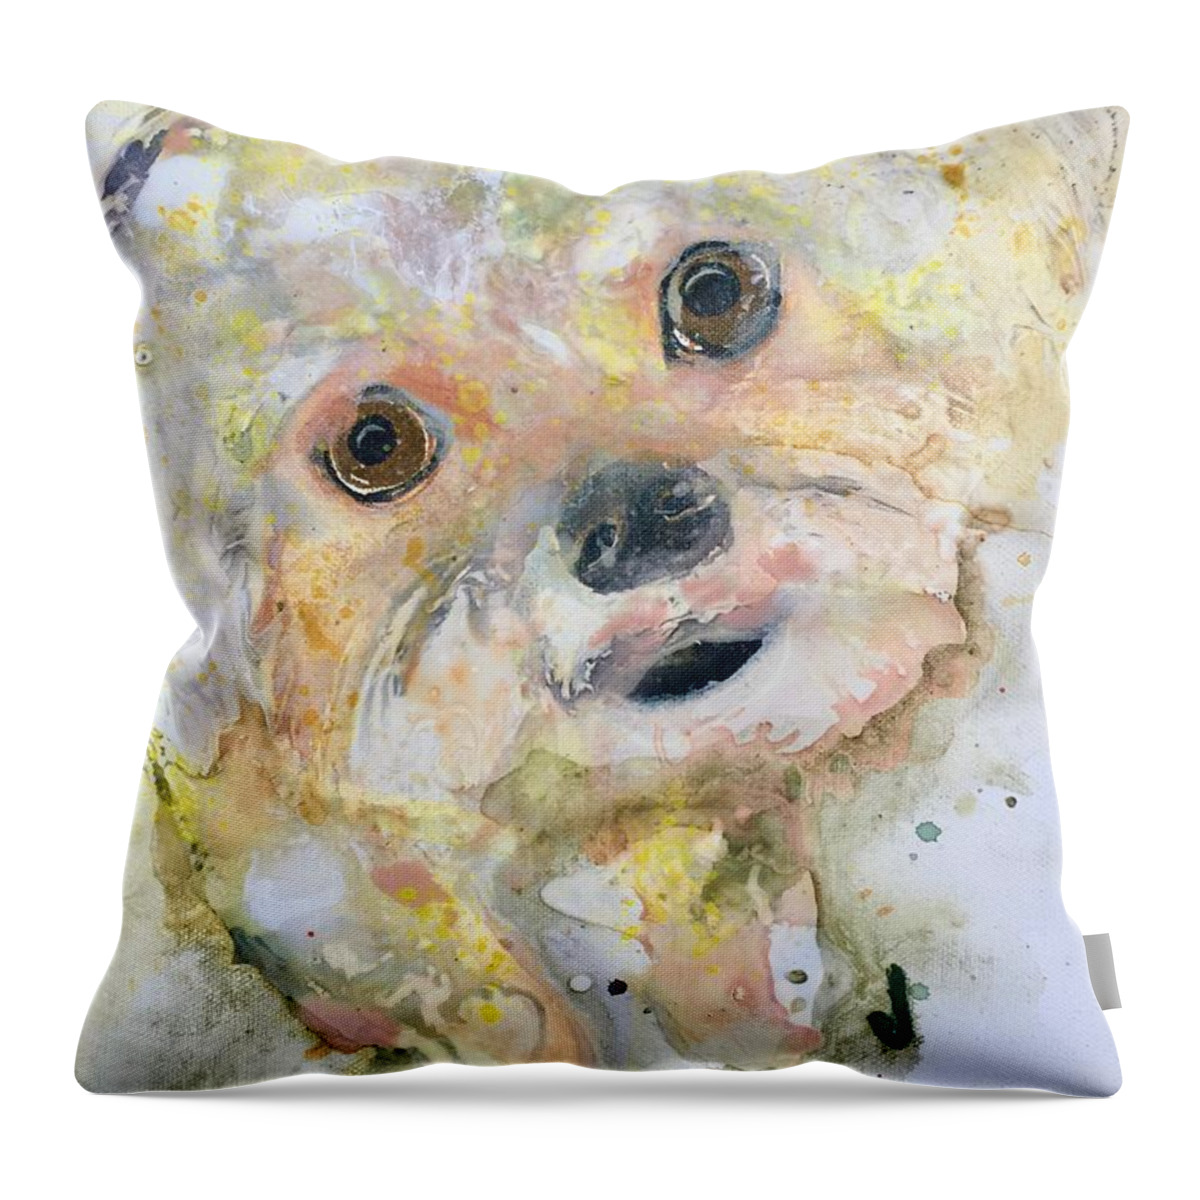 Dog Throw Pillow featuring the painting Compact by Kasha Ritter